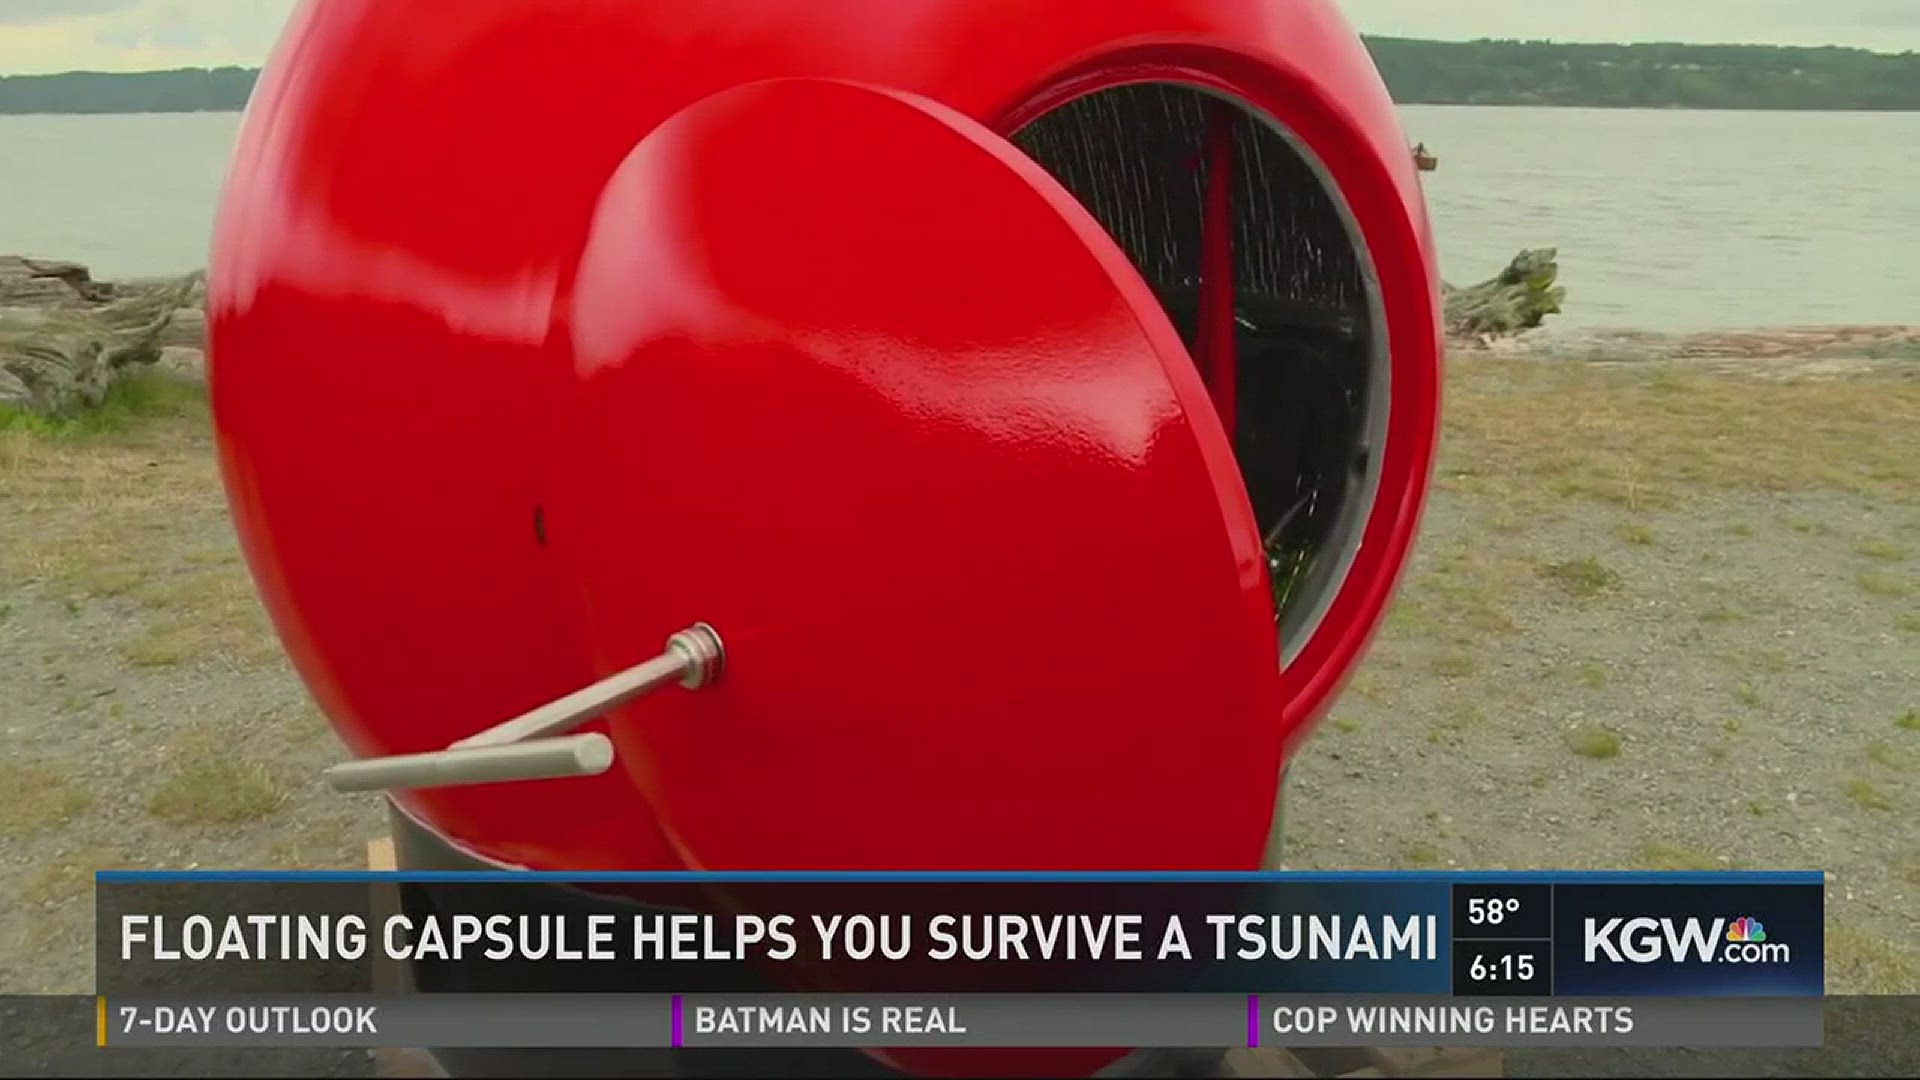 Floating capsule can help you survive a tsunami